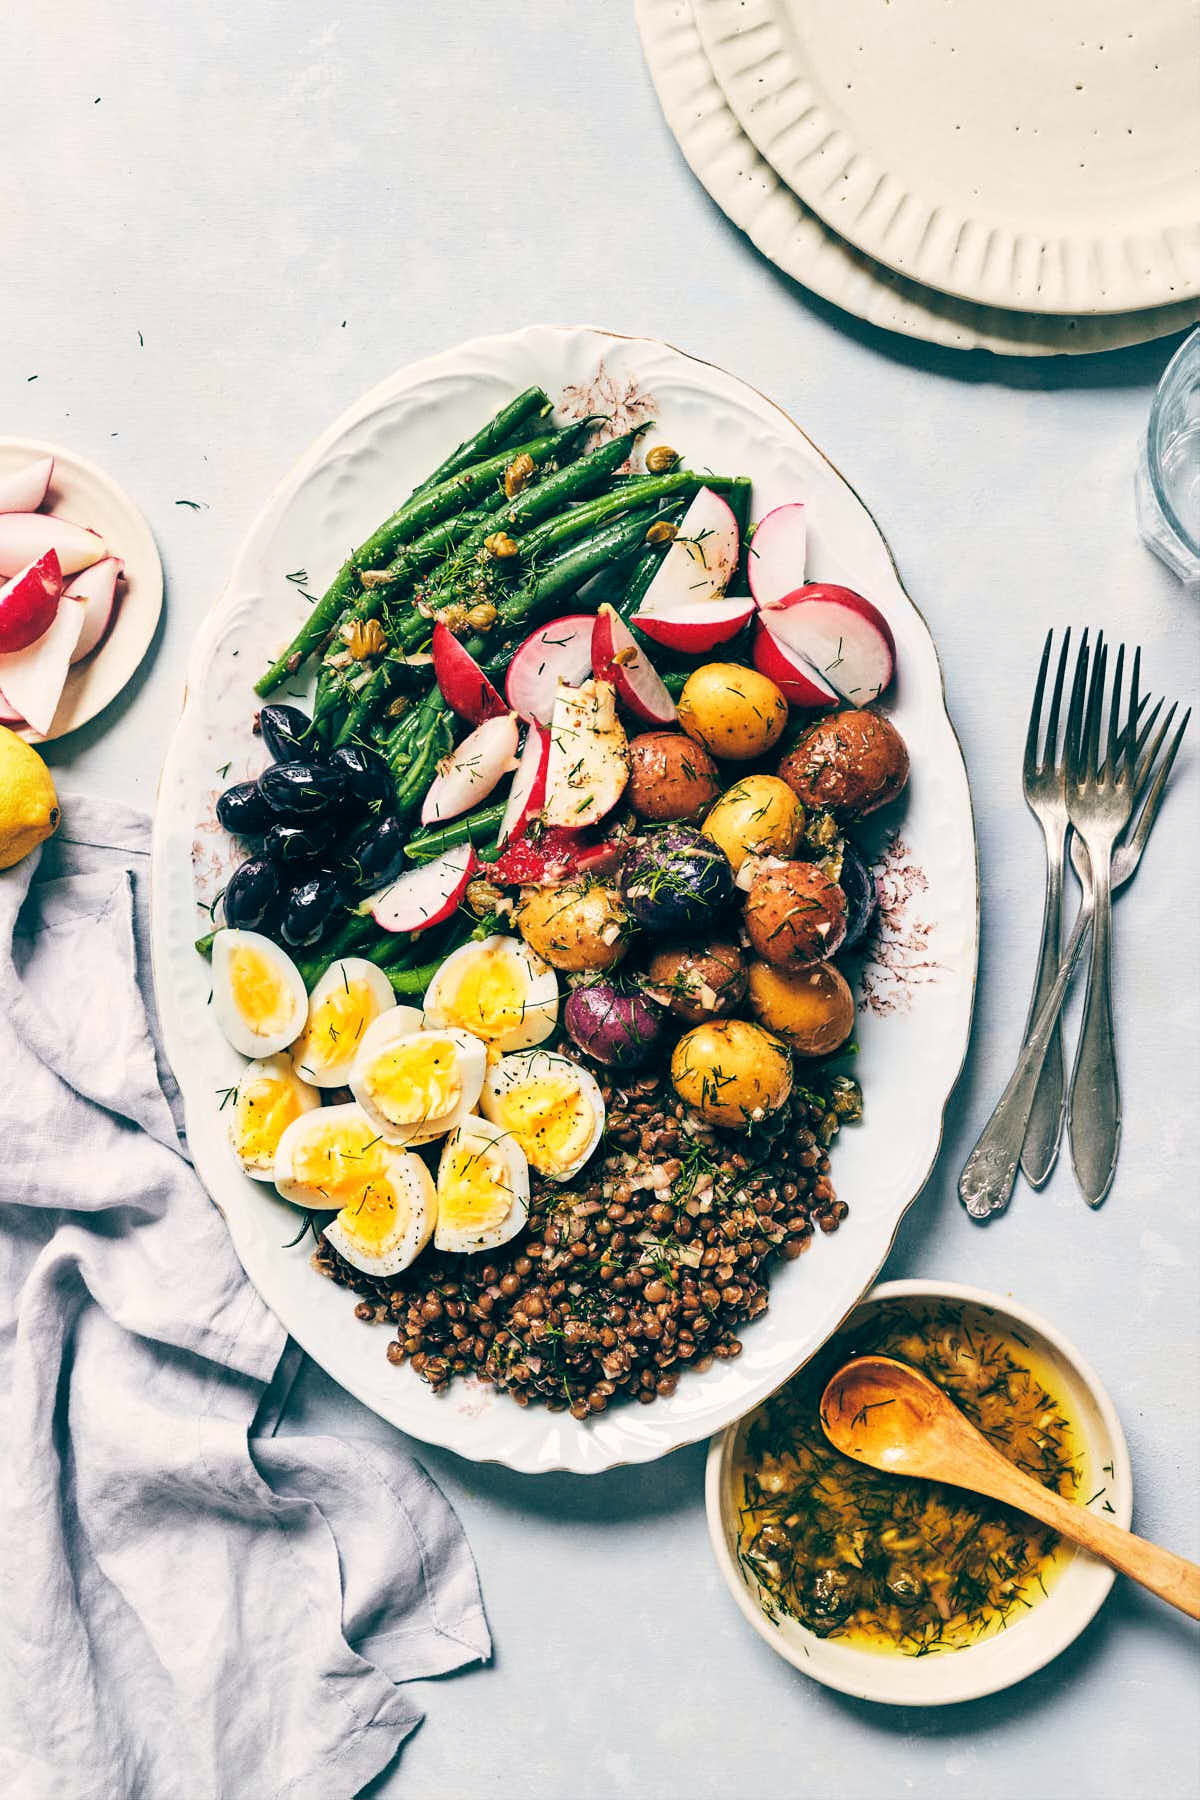 Nicoise salad with eggs, roasted potatoes, green beans, lentils and fresh radishes